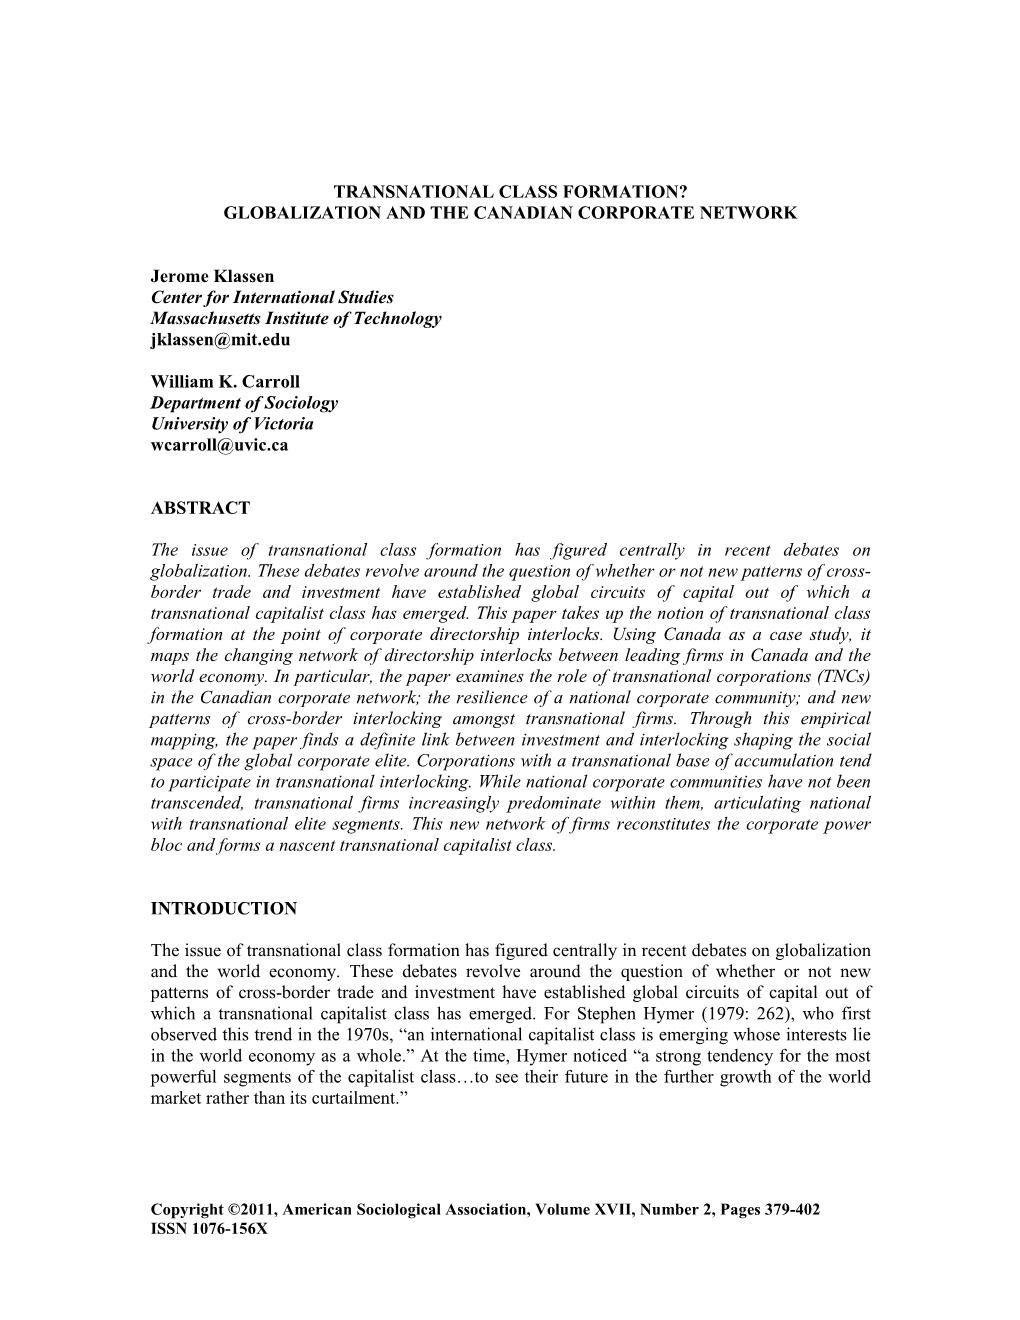 Transnational Class Formation? Globalization and the Canadian Corporate Network